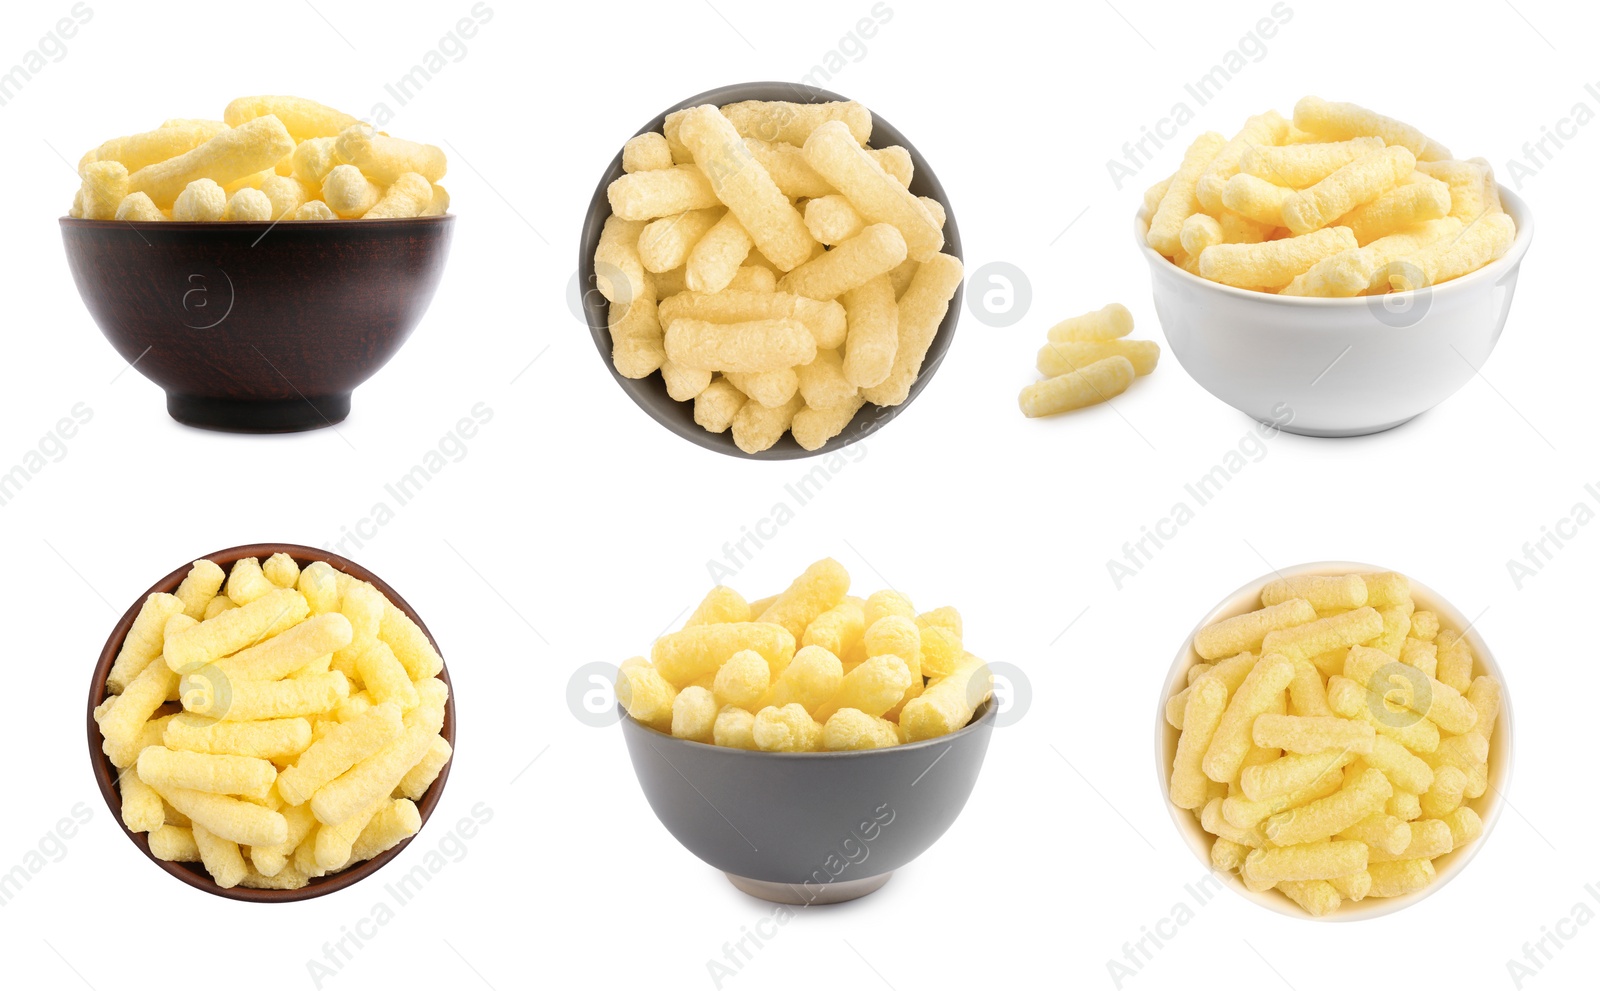 Image of Bowls with tasty corn sticks on white background, top and side views. Collage design